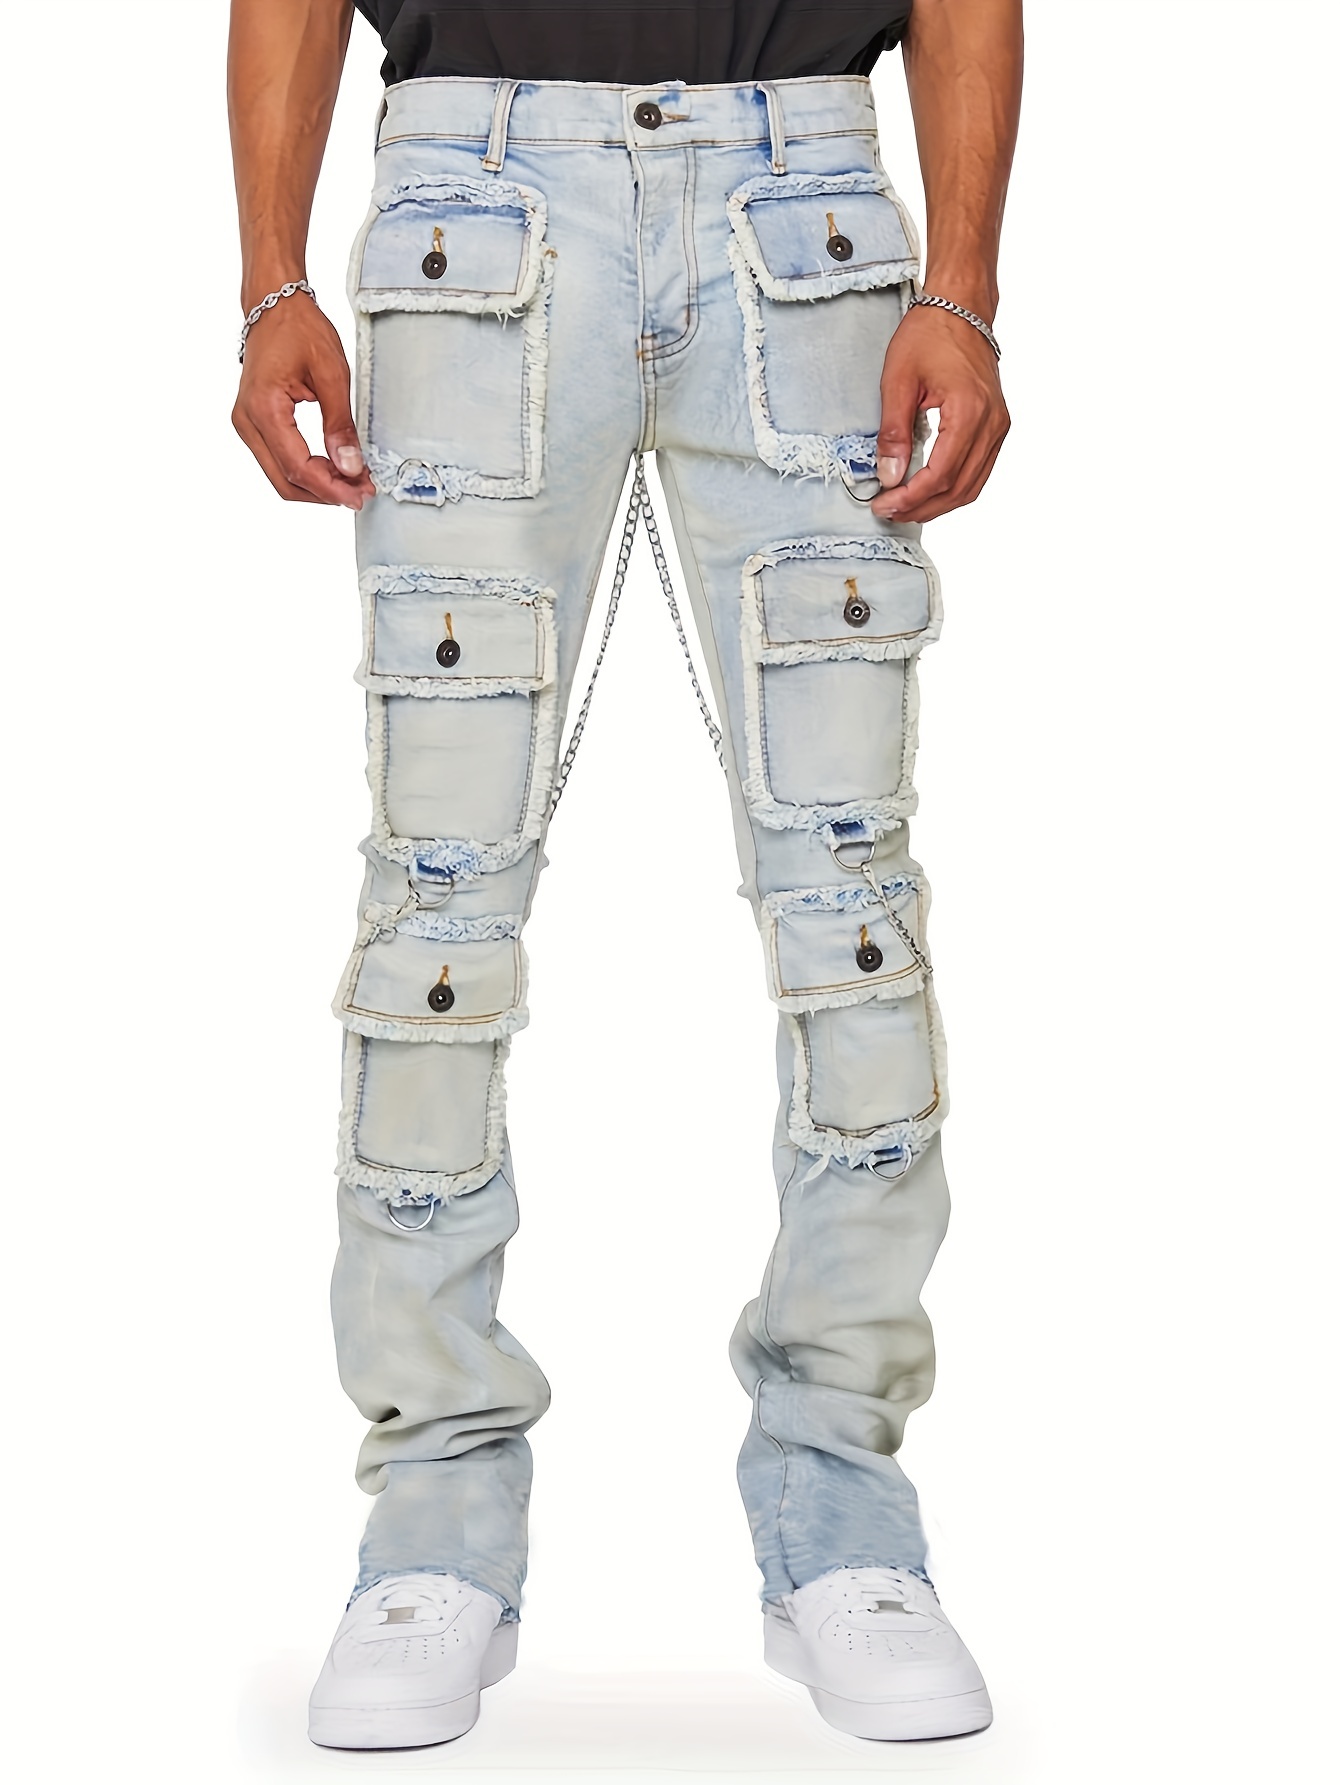 MEK USA Y2K Biker Chrome Hearts Style Straight Fit Jeans Made in